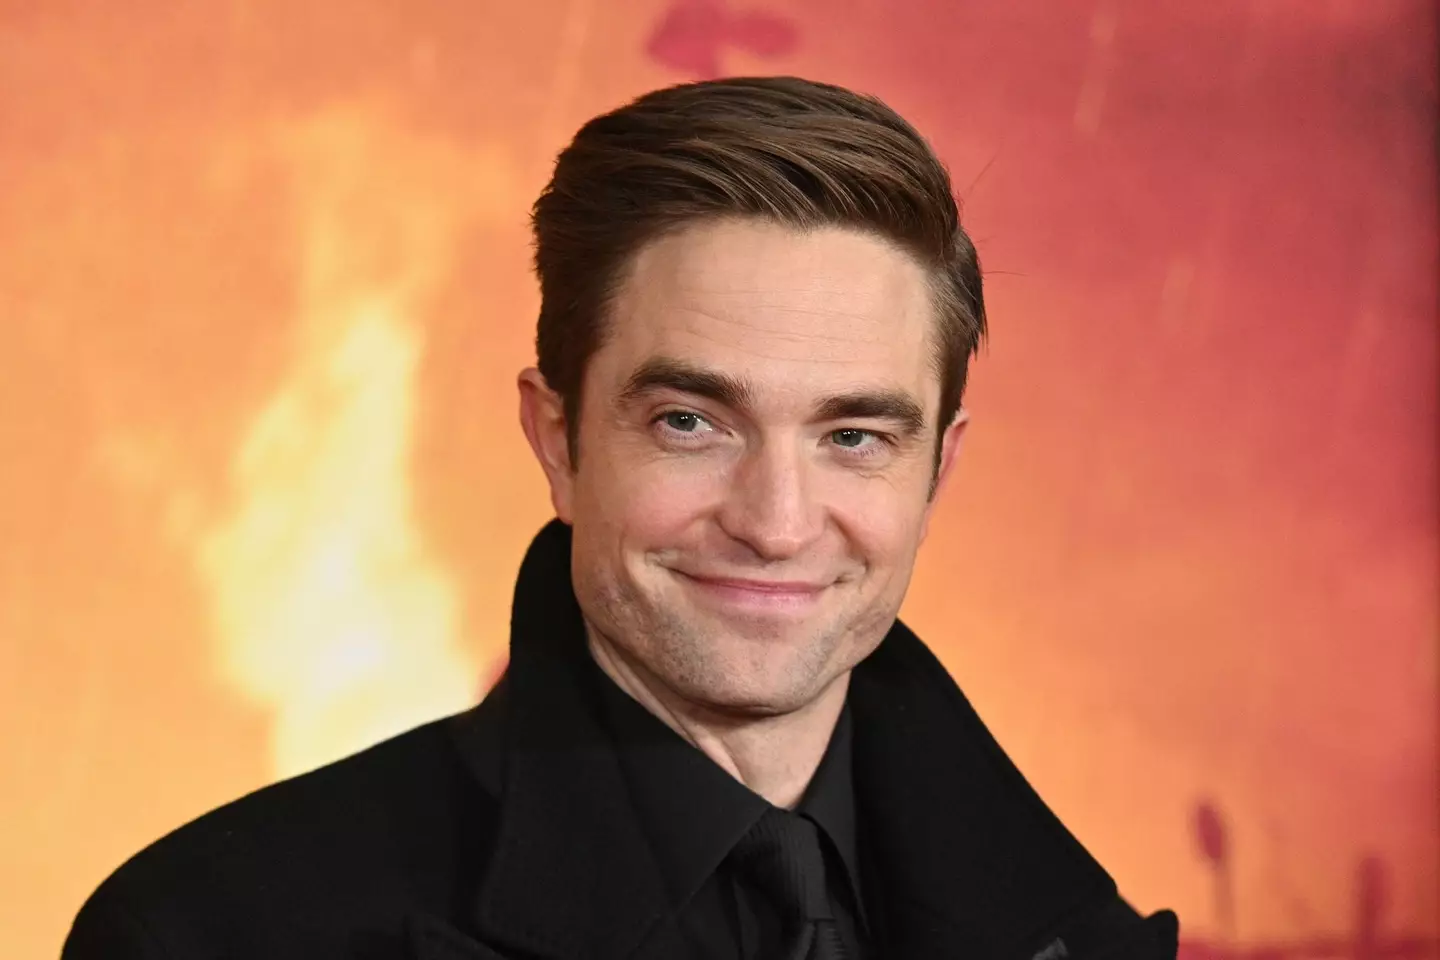 Robert Pattinson has remained the world's most attractive man since 2020.